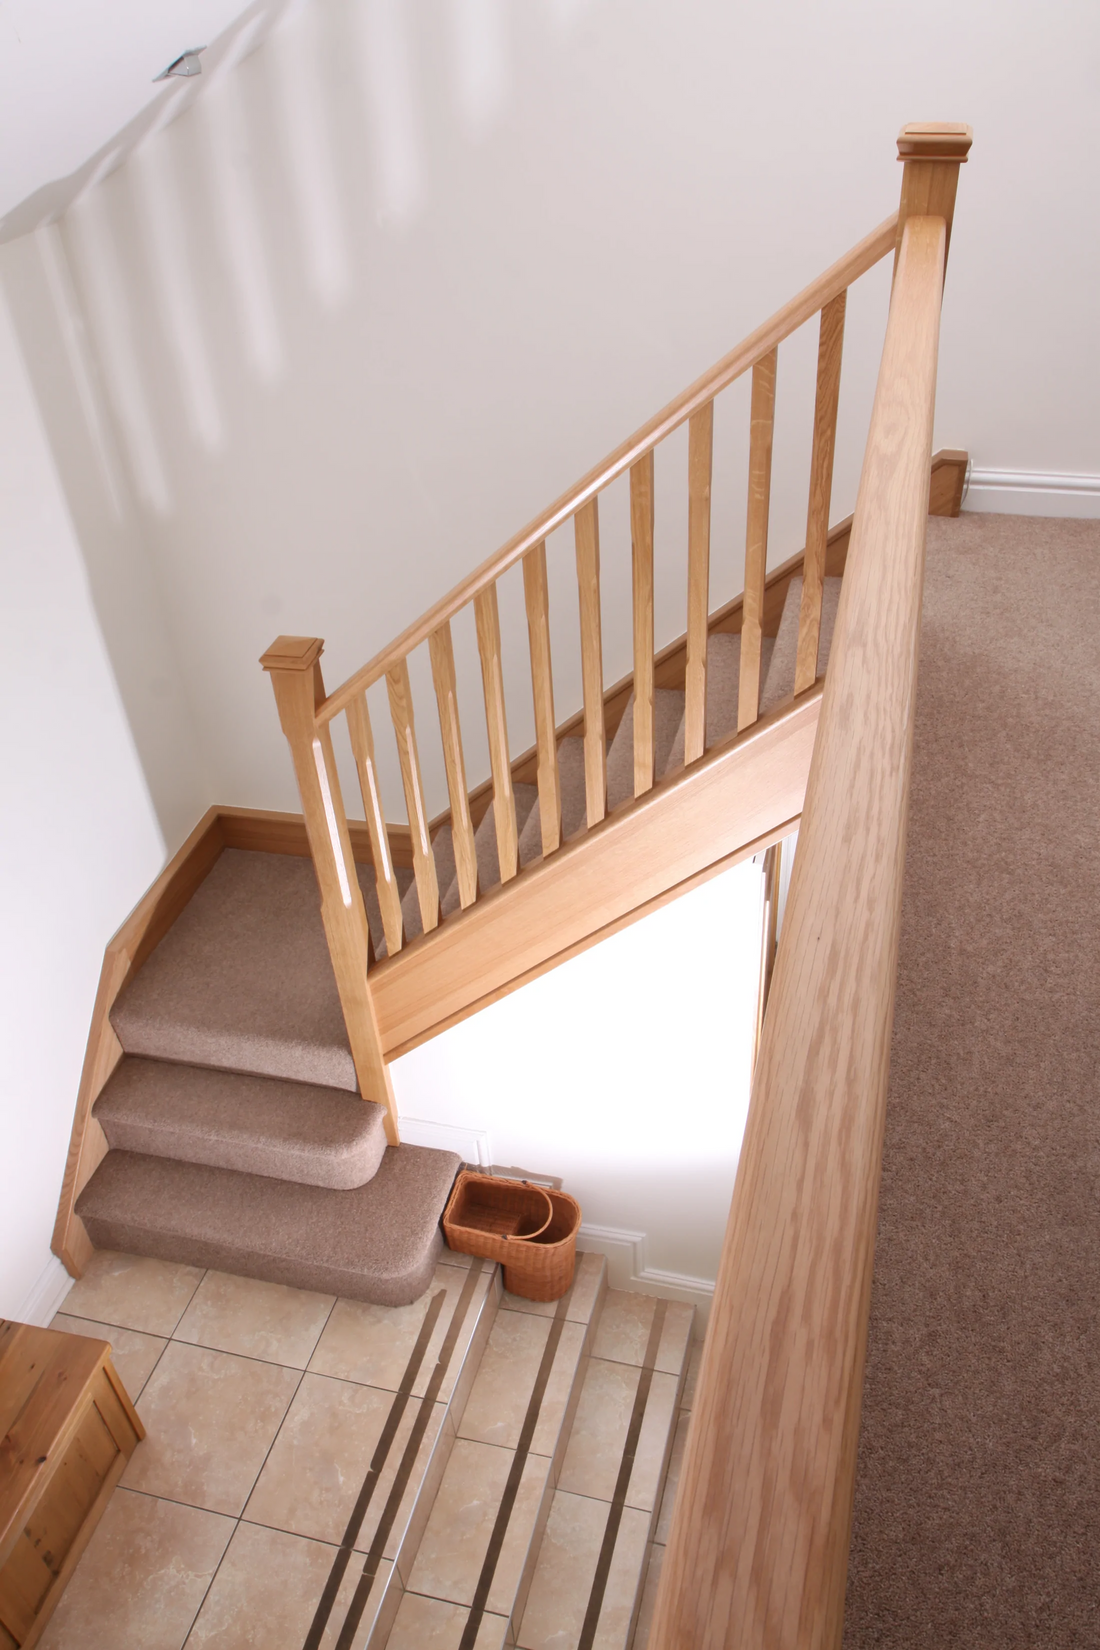 Different Stair Parts Explained